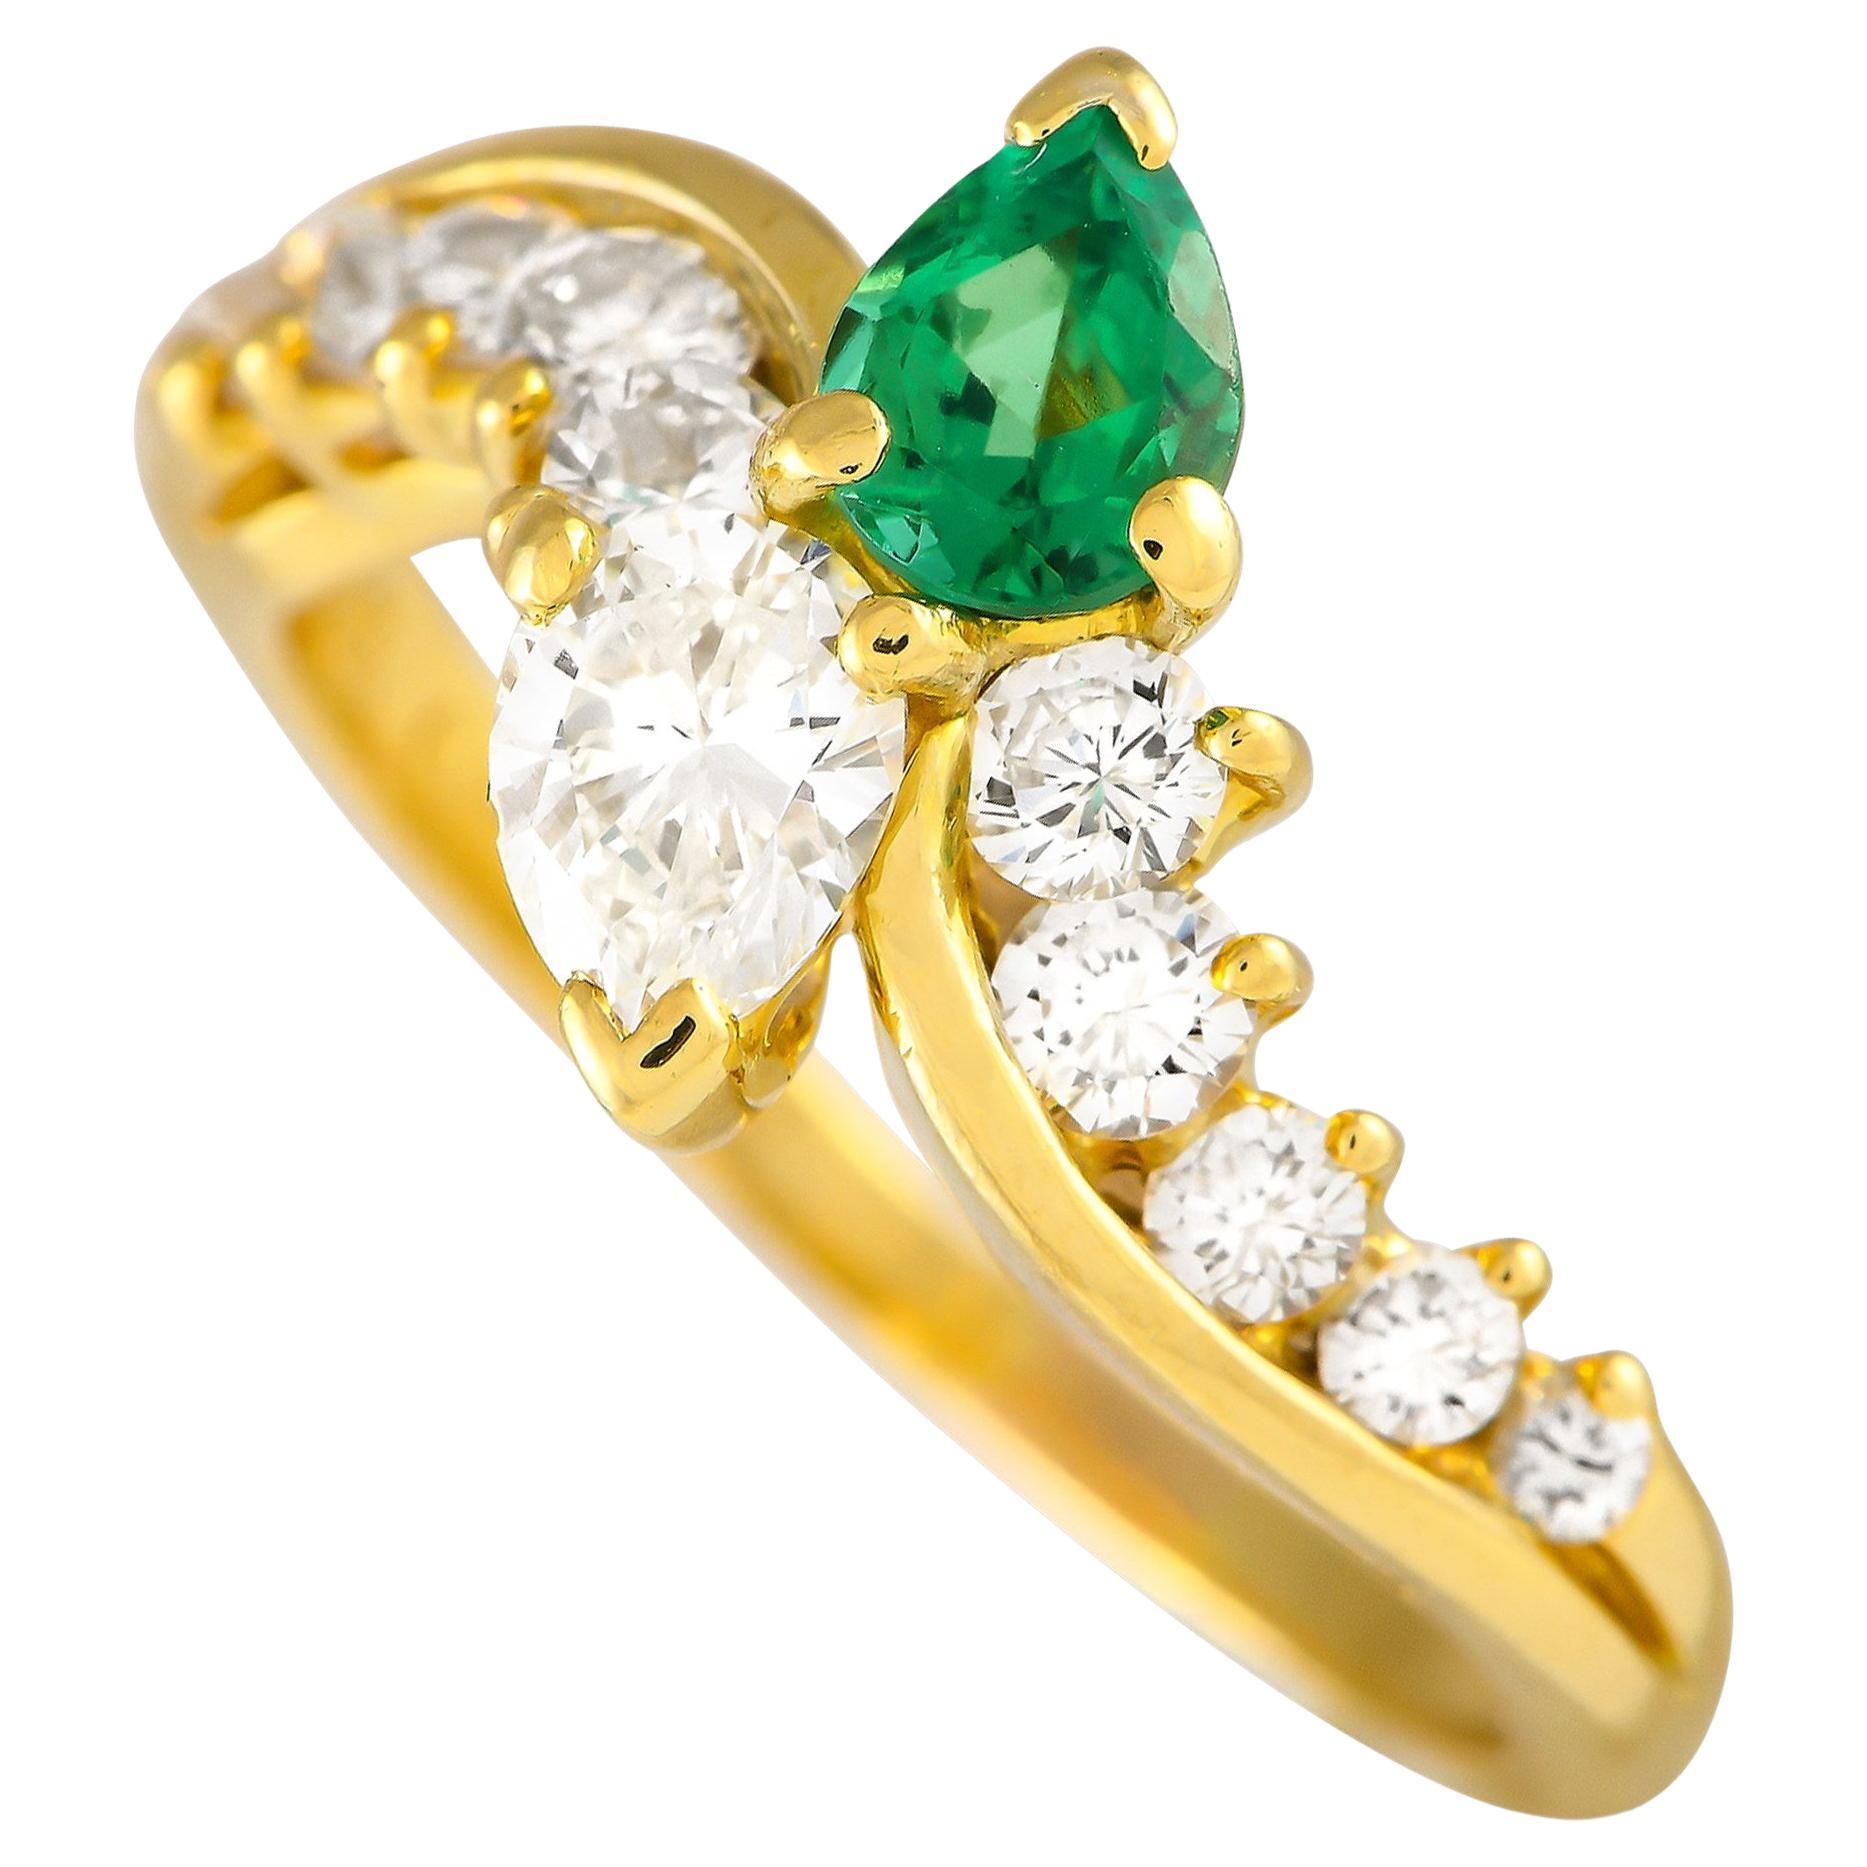 LB Exclusive 18K Yellow Gold 1.0ct Diamond and Emerald Ring